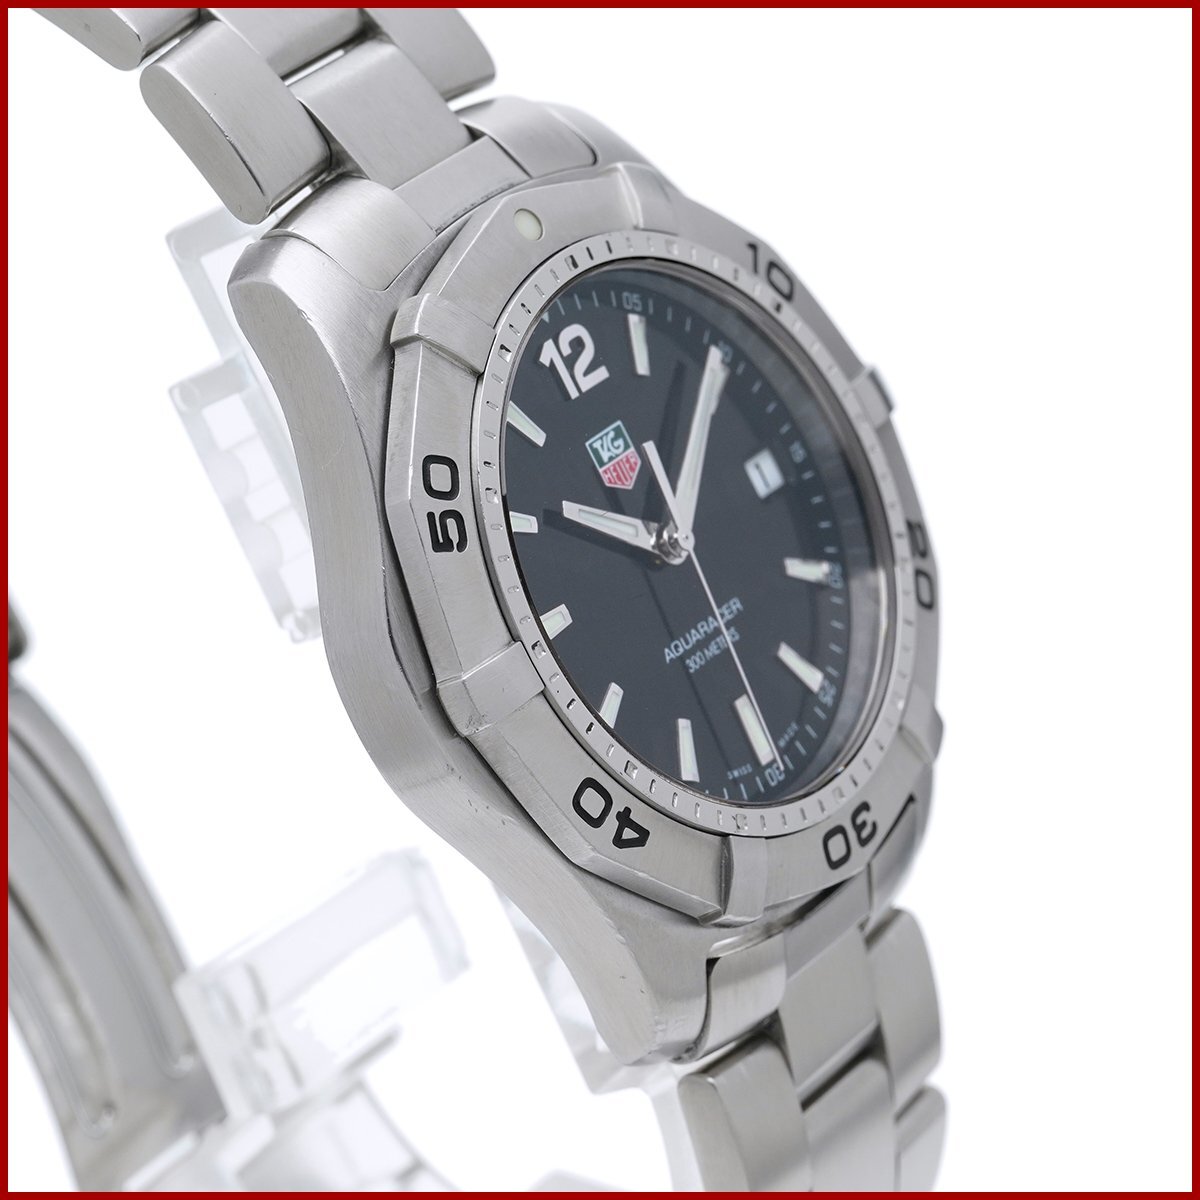  TAG Heuer men's wristwatch Aquaracer WAF1110 quartz battery type SS black face 300m waterproof arm around 16cm beautiful goods new goods has been finished 